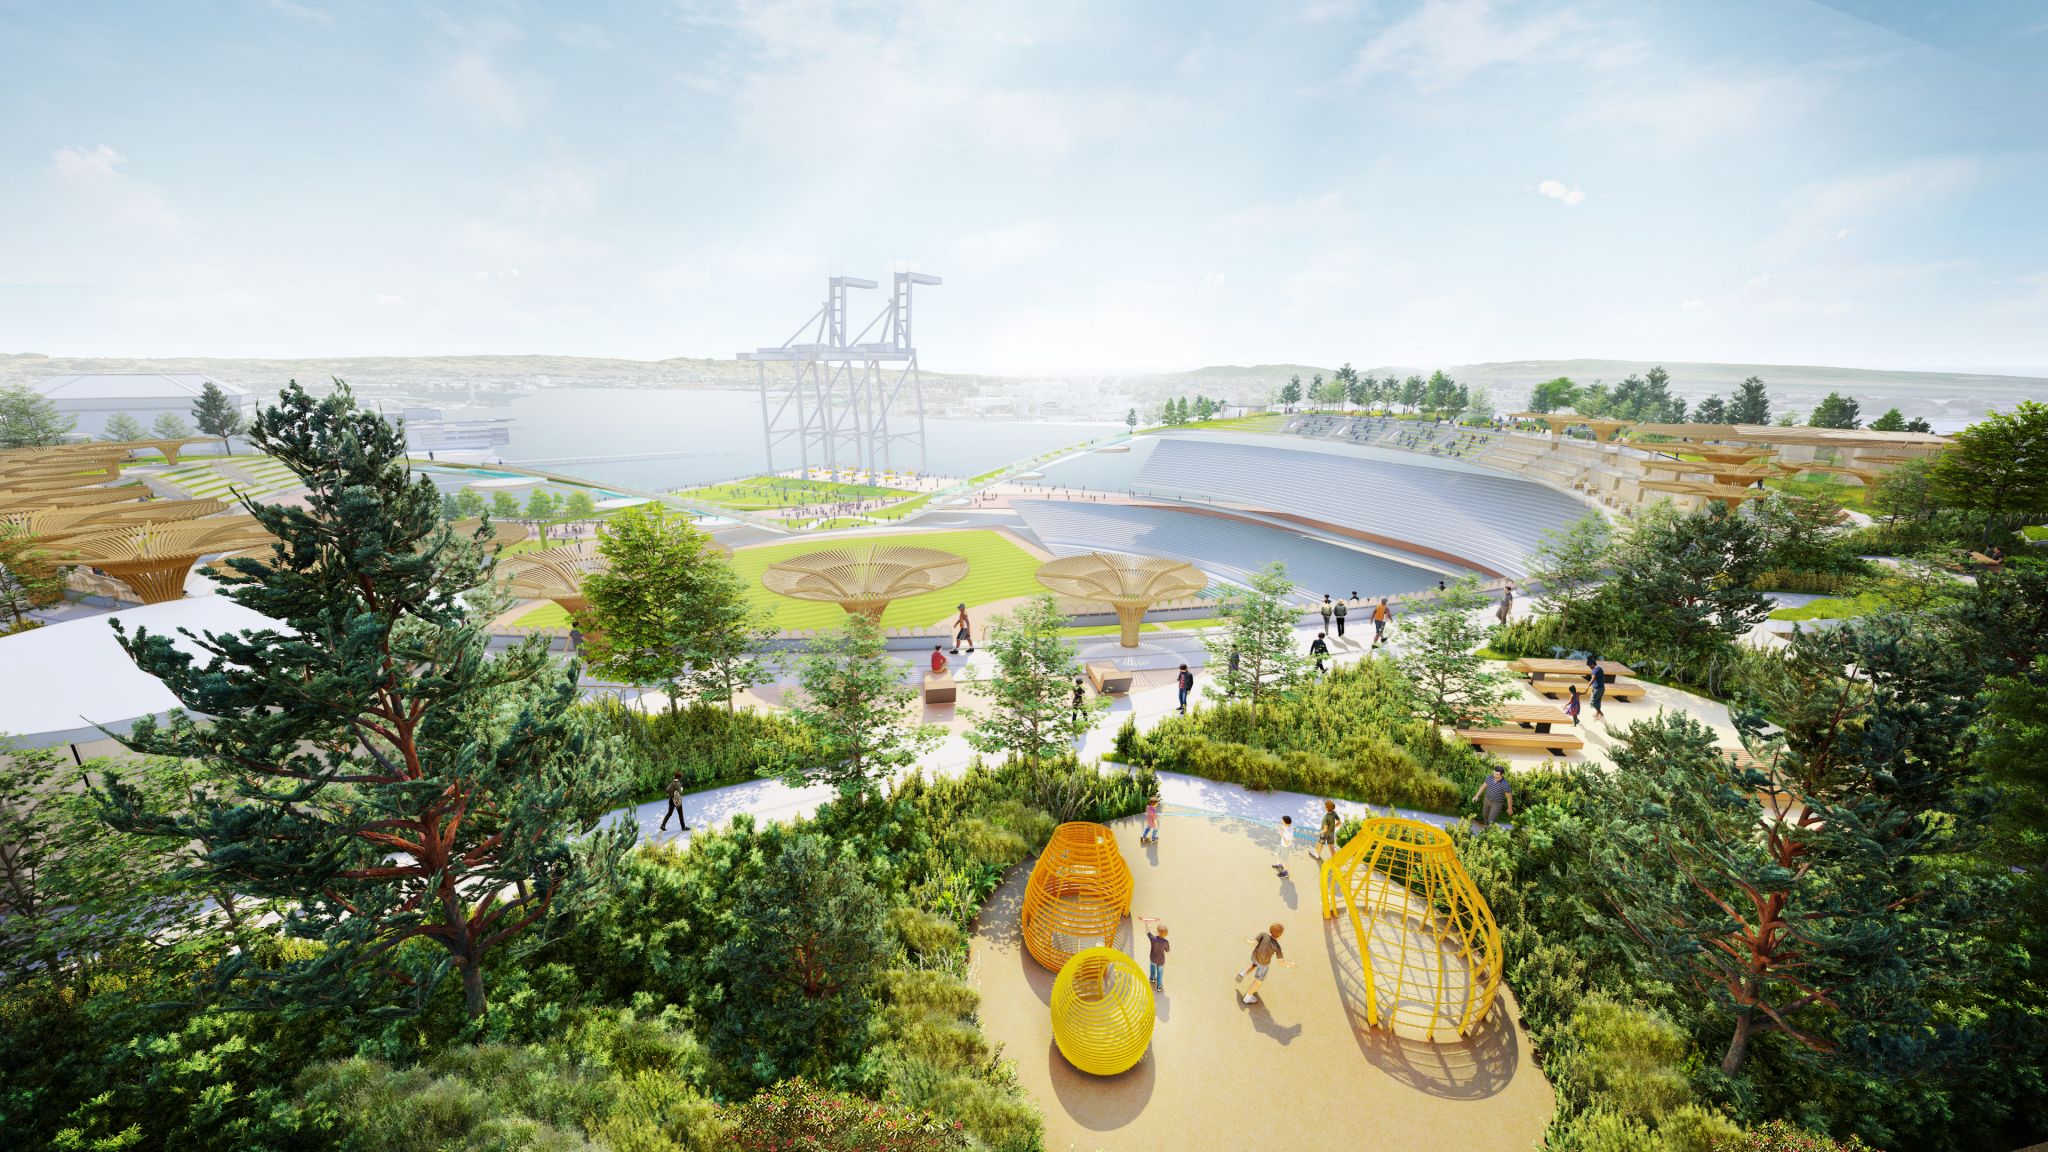 BIG unveils designs for new Oakland A's stadium featuring a rooftop park